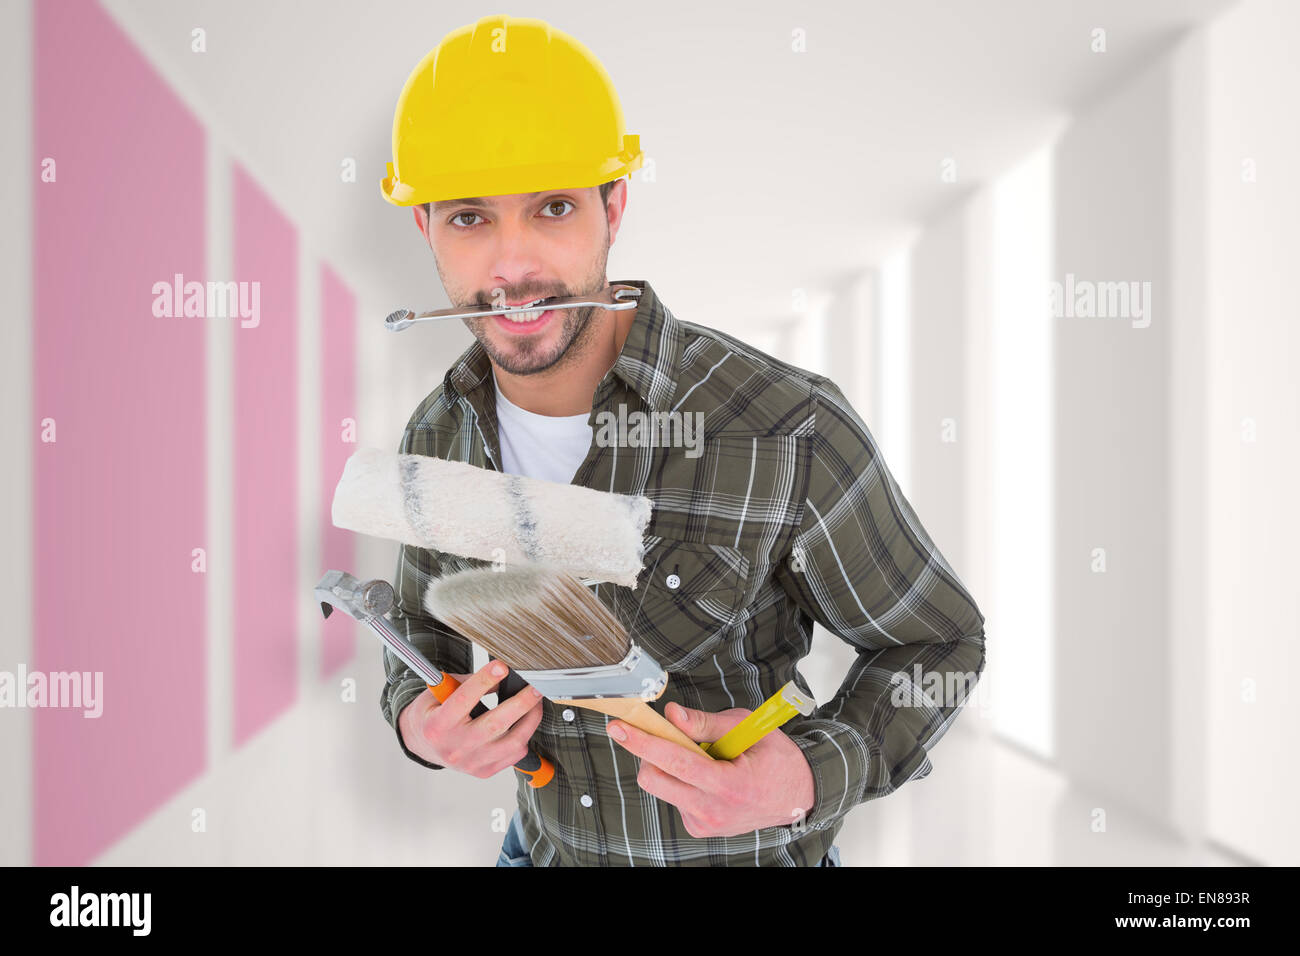 Composite image of manual worker holding various tools Stock Photo